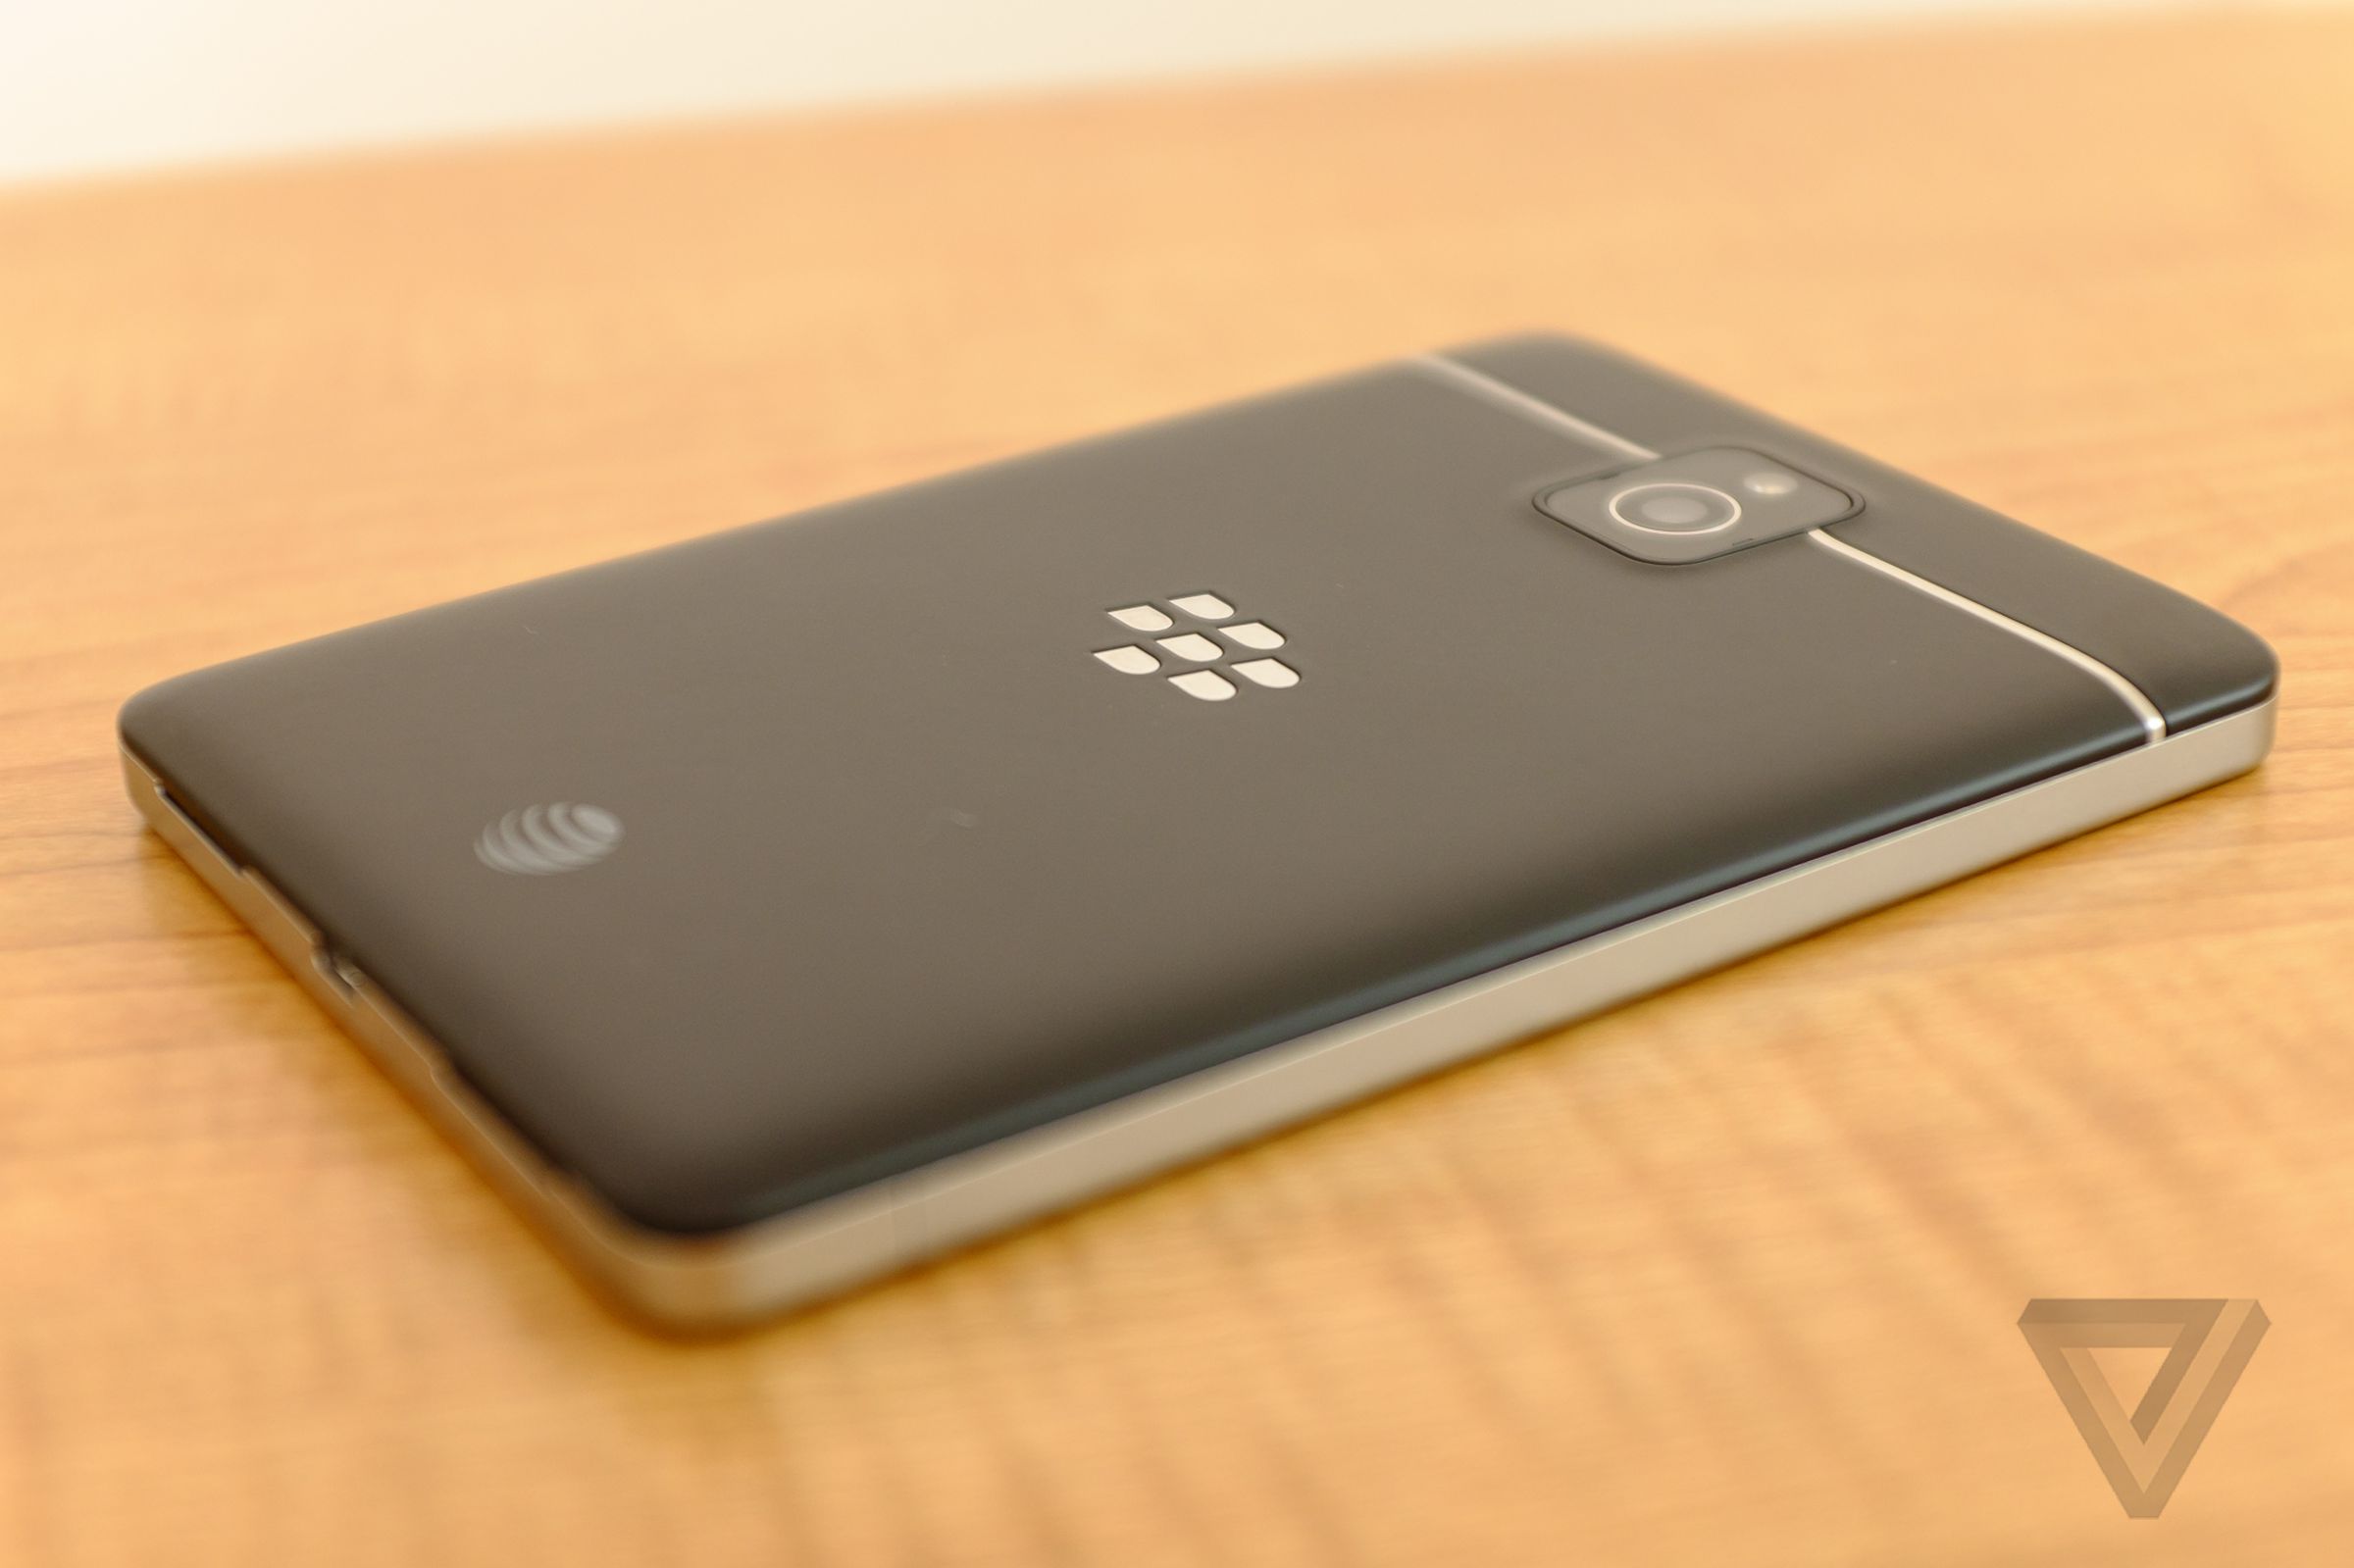 BlackBerry Passport for AT&T photos